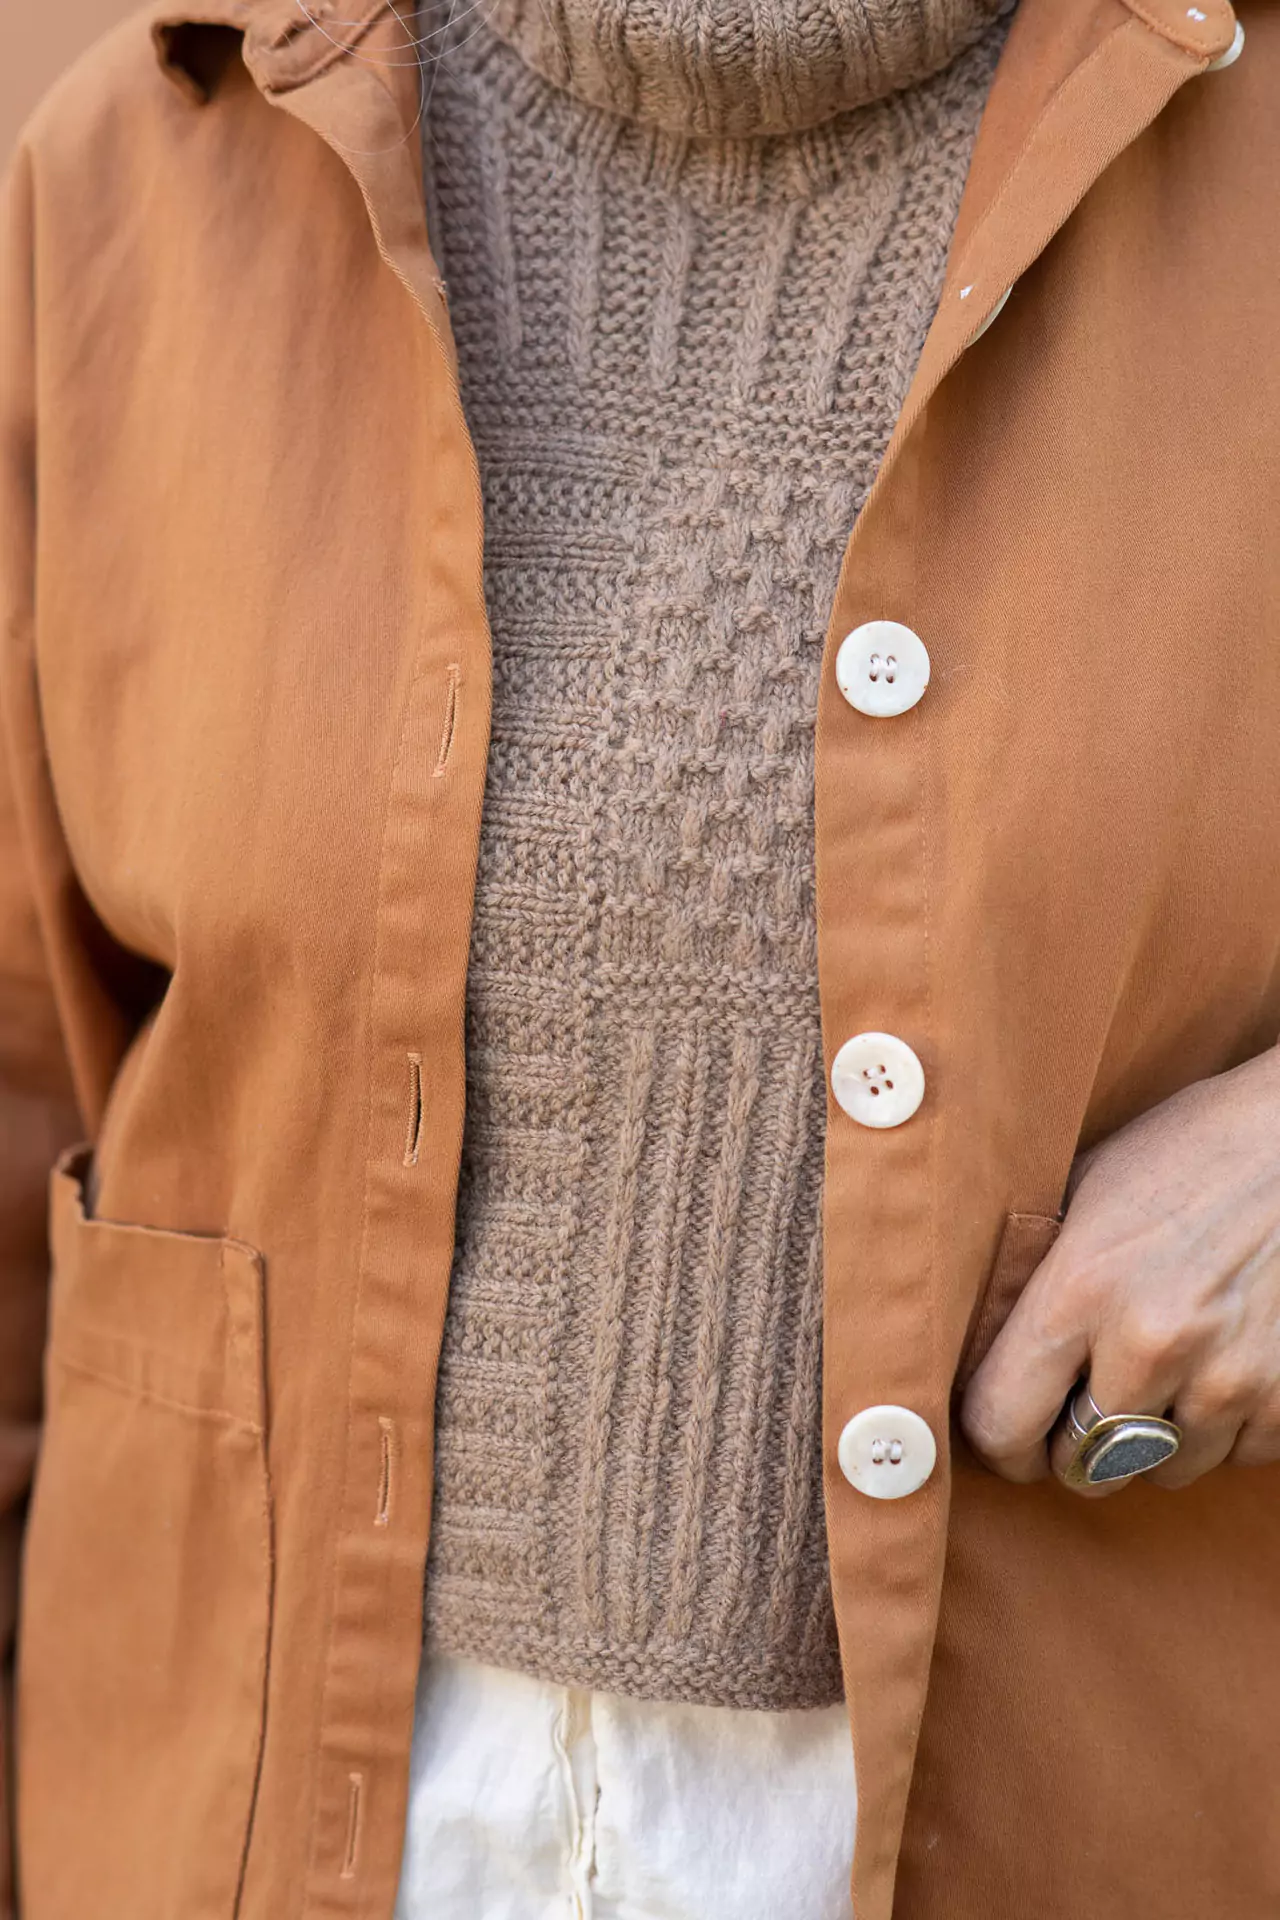 A close up image of a woman's torso with a textured handknitted dickey accessory worn beneath a jacket